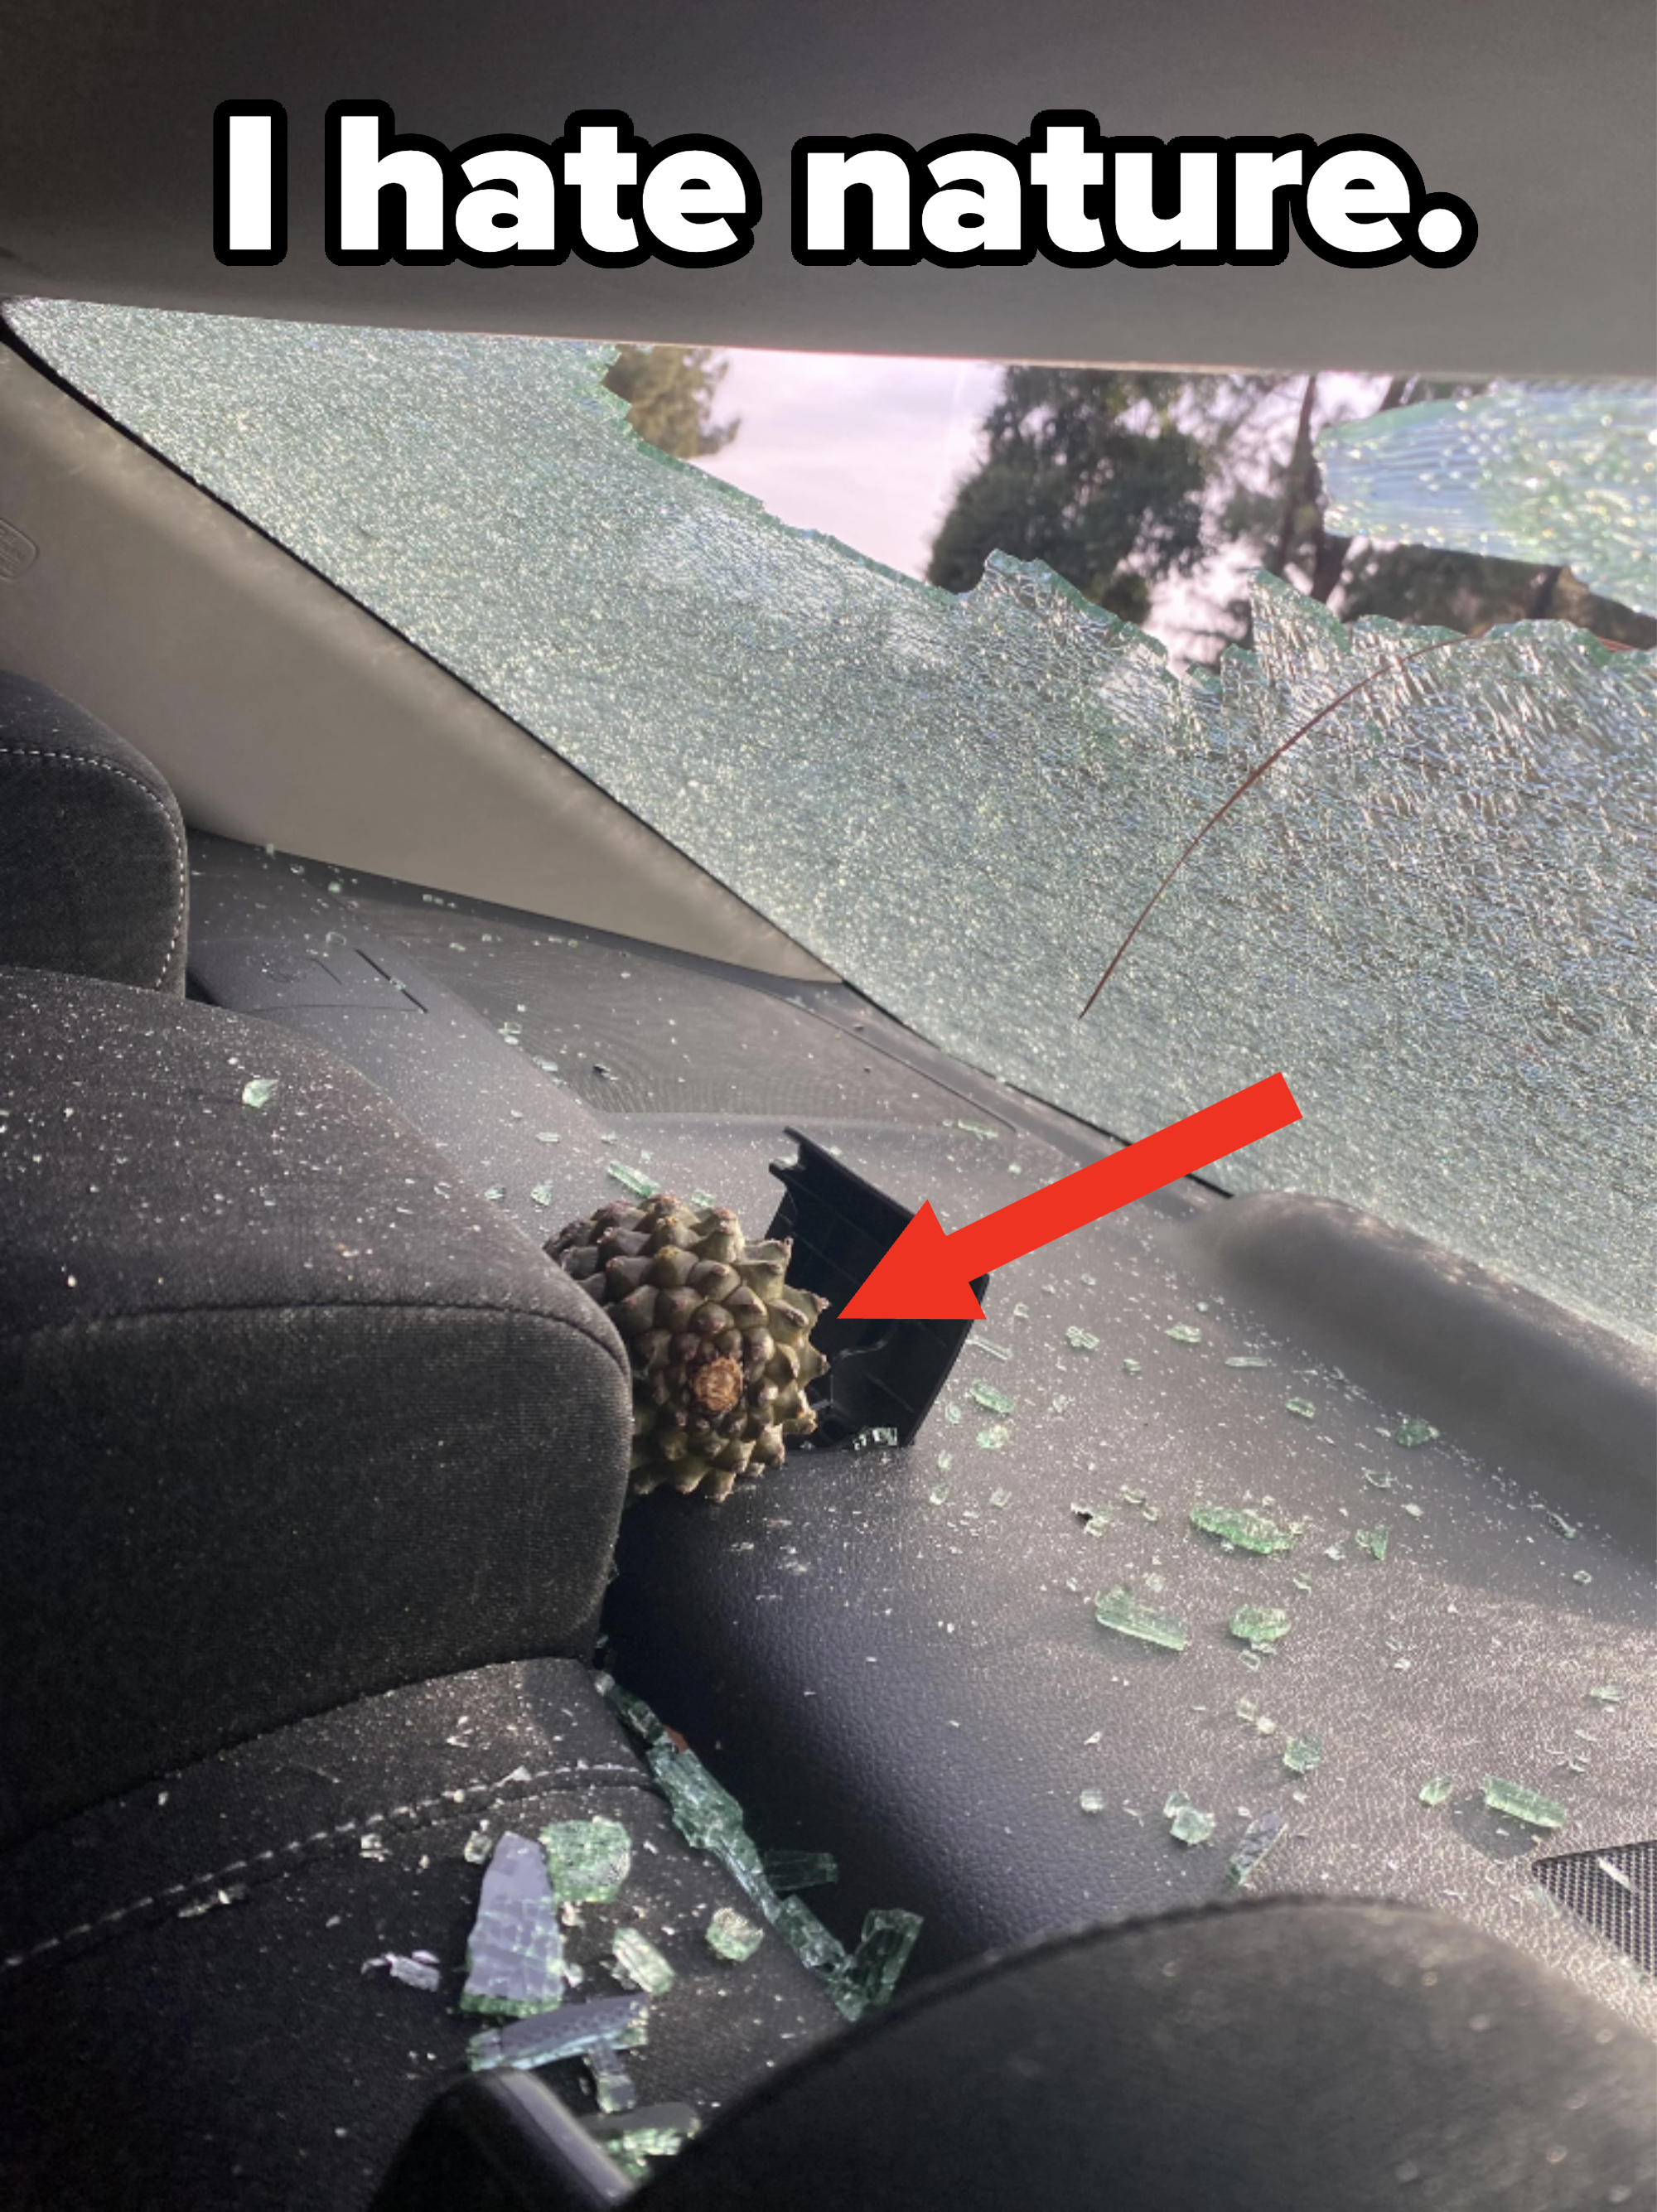 A person&#x27;s car window is smashed, and a pinecone is inside the car